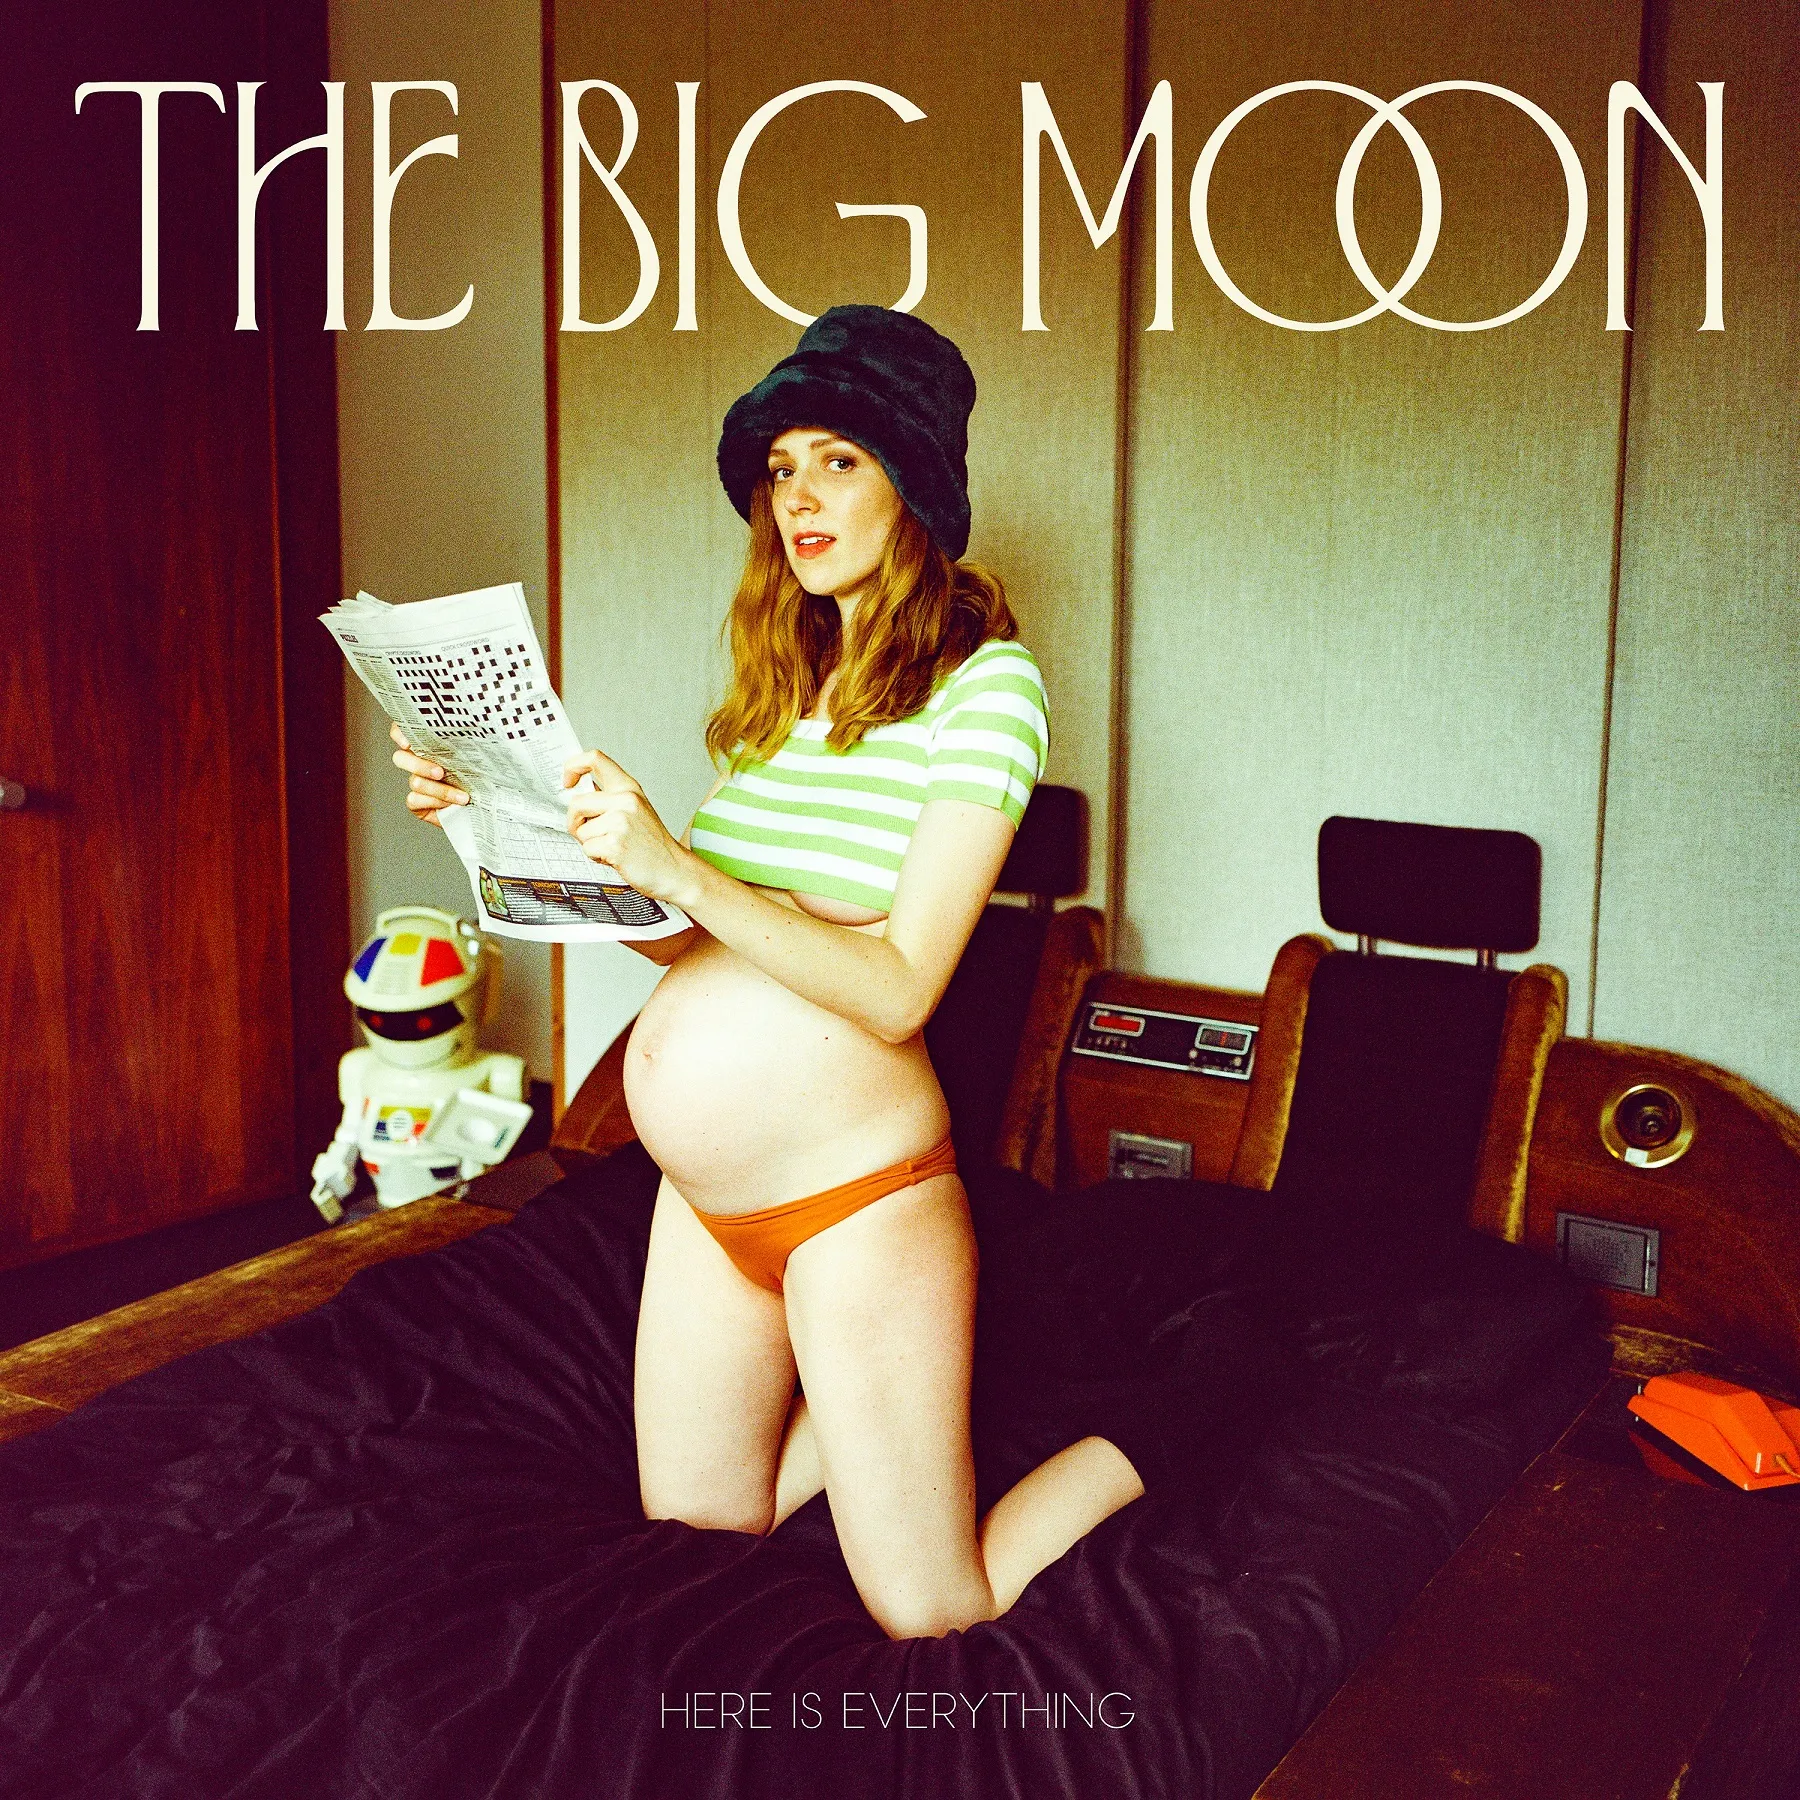 <strong>The Big Moon - Here is Everything</strong> (Vinyl LP - clear)